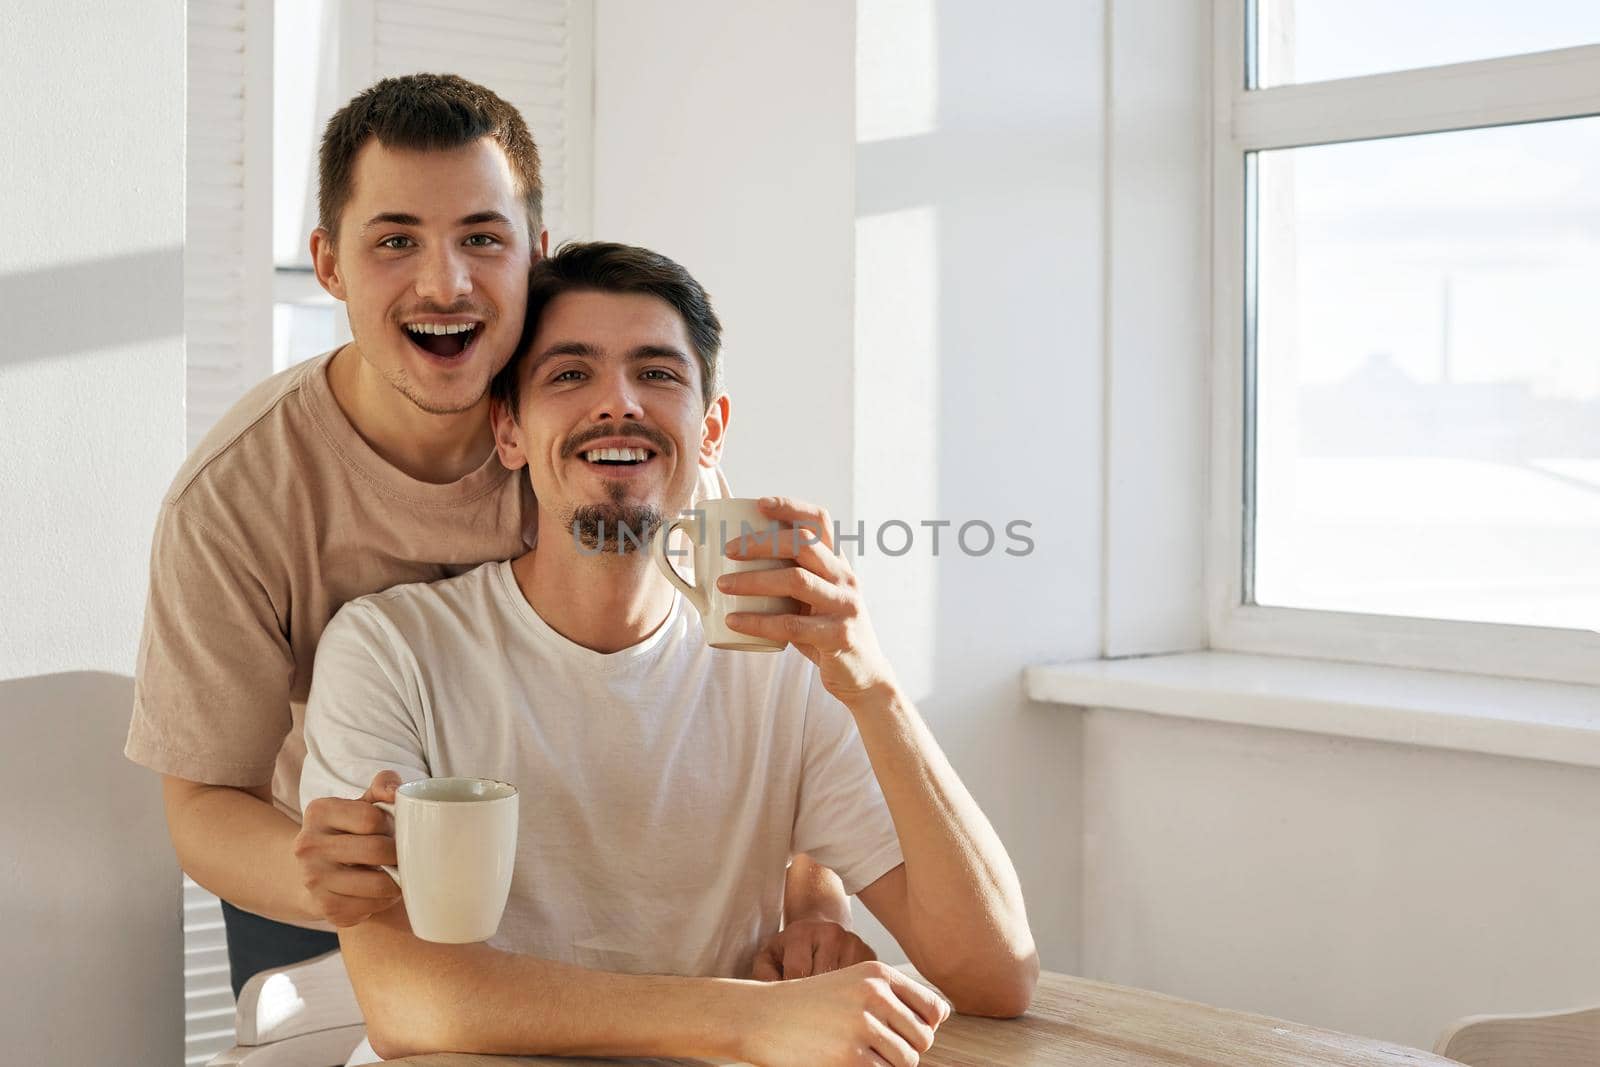 Cheerful young men with mugs of hot drinks smiling and looking at camera while sitting at table in morning at home